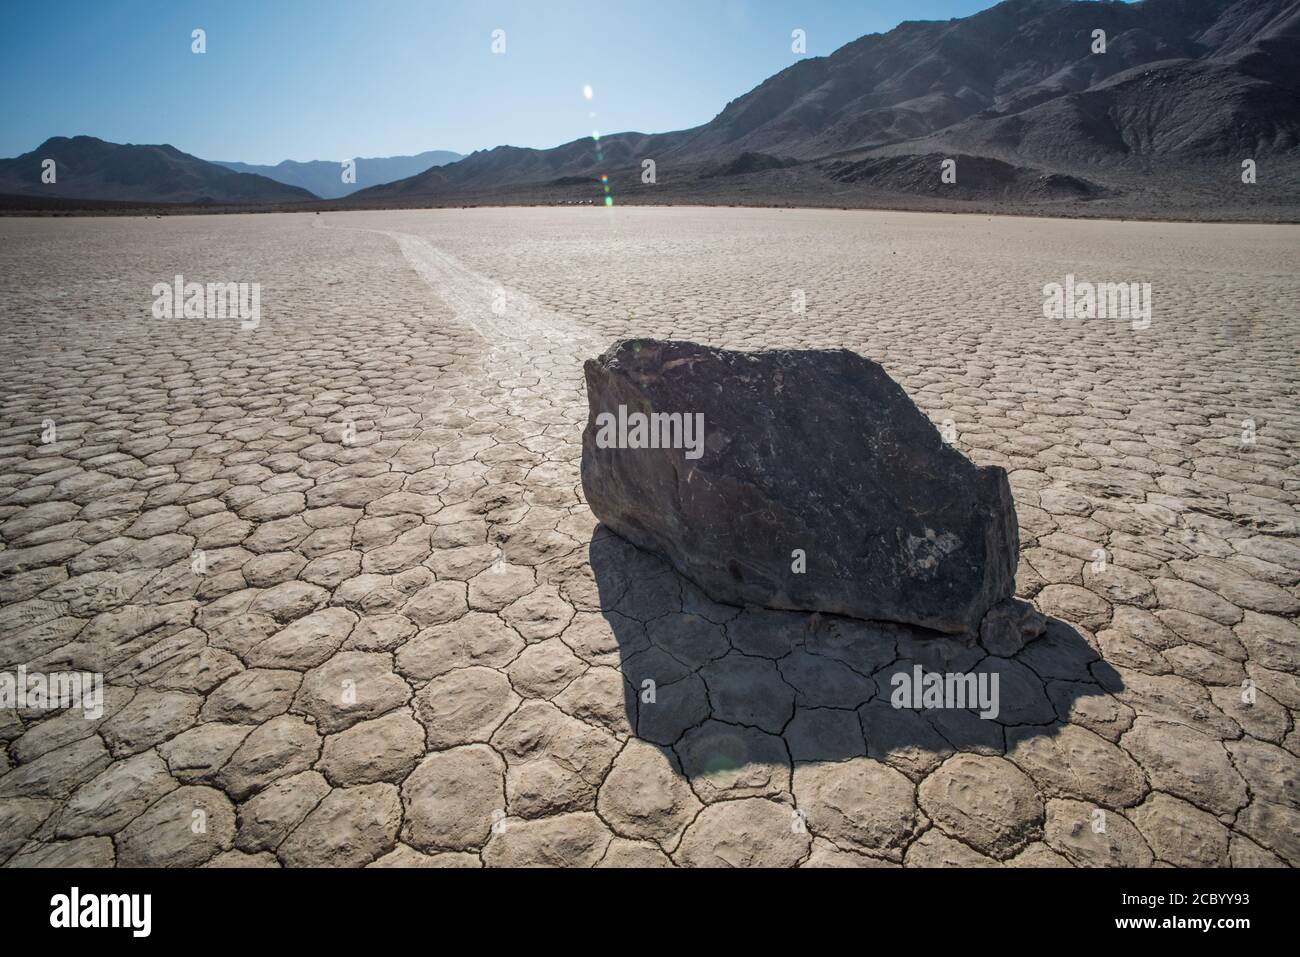 The famous sailing stones of the racetrack in Death Valley National Park, California. For a long time it was a mystery how they moved and left trails. Stock Photo